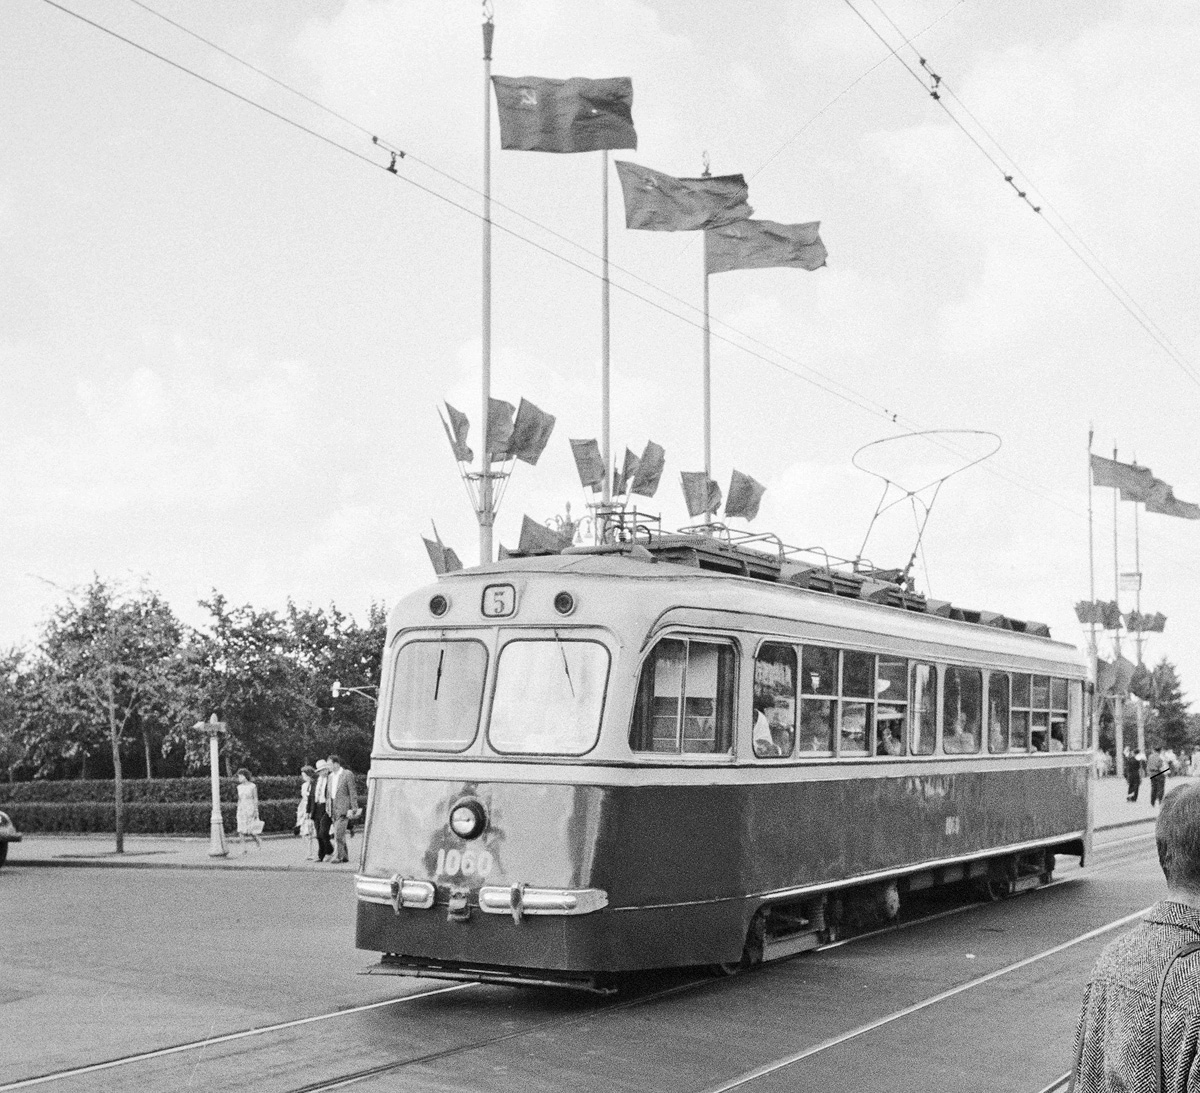 Moscow, M-38 № 1060; Moscow — Historical photos — Tramway and Trolleybus (1946-1991)